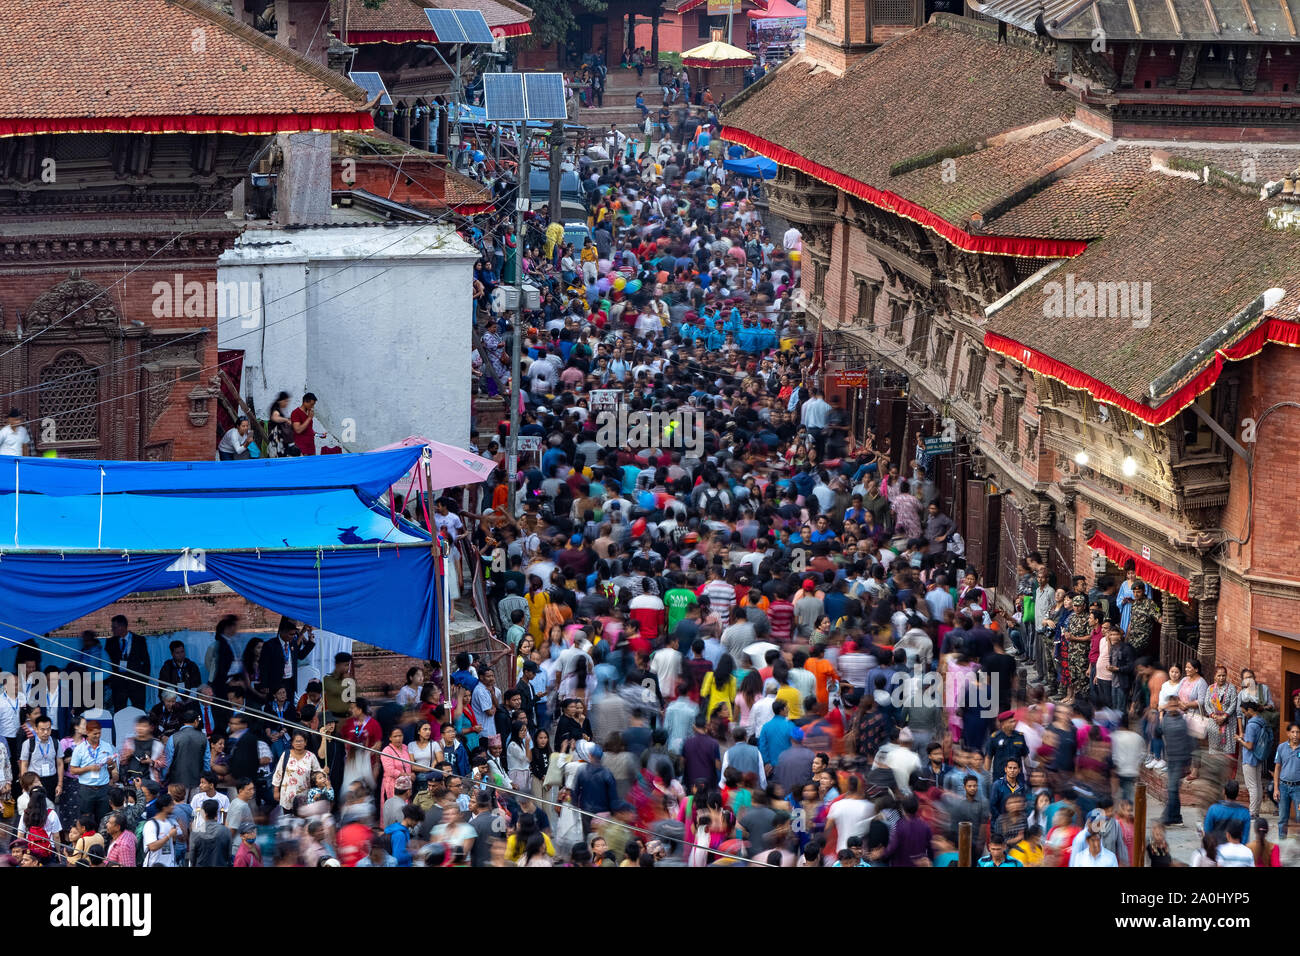 Crowd of people gathers to watch and celebrate Indra Jatra Festival Stock Photo